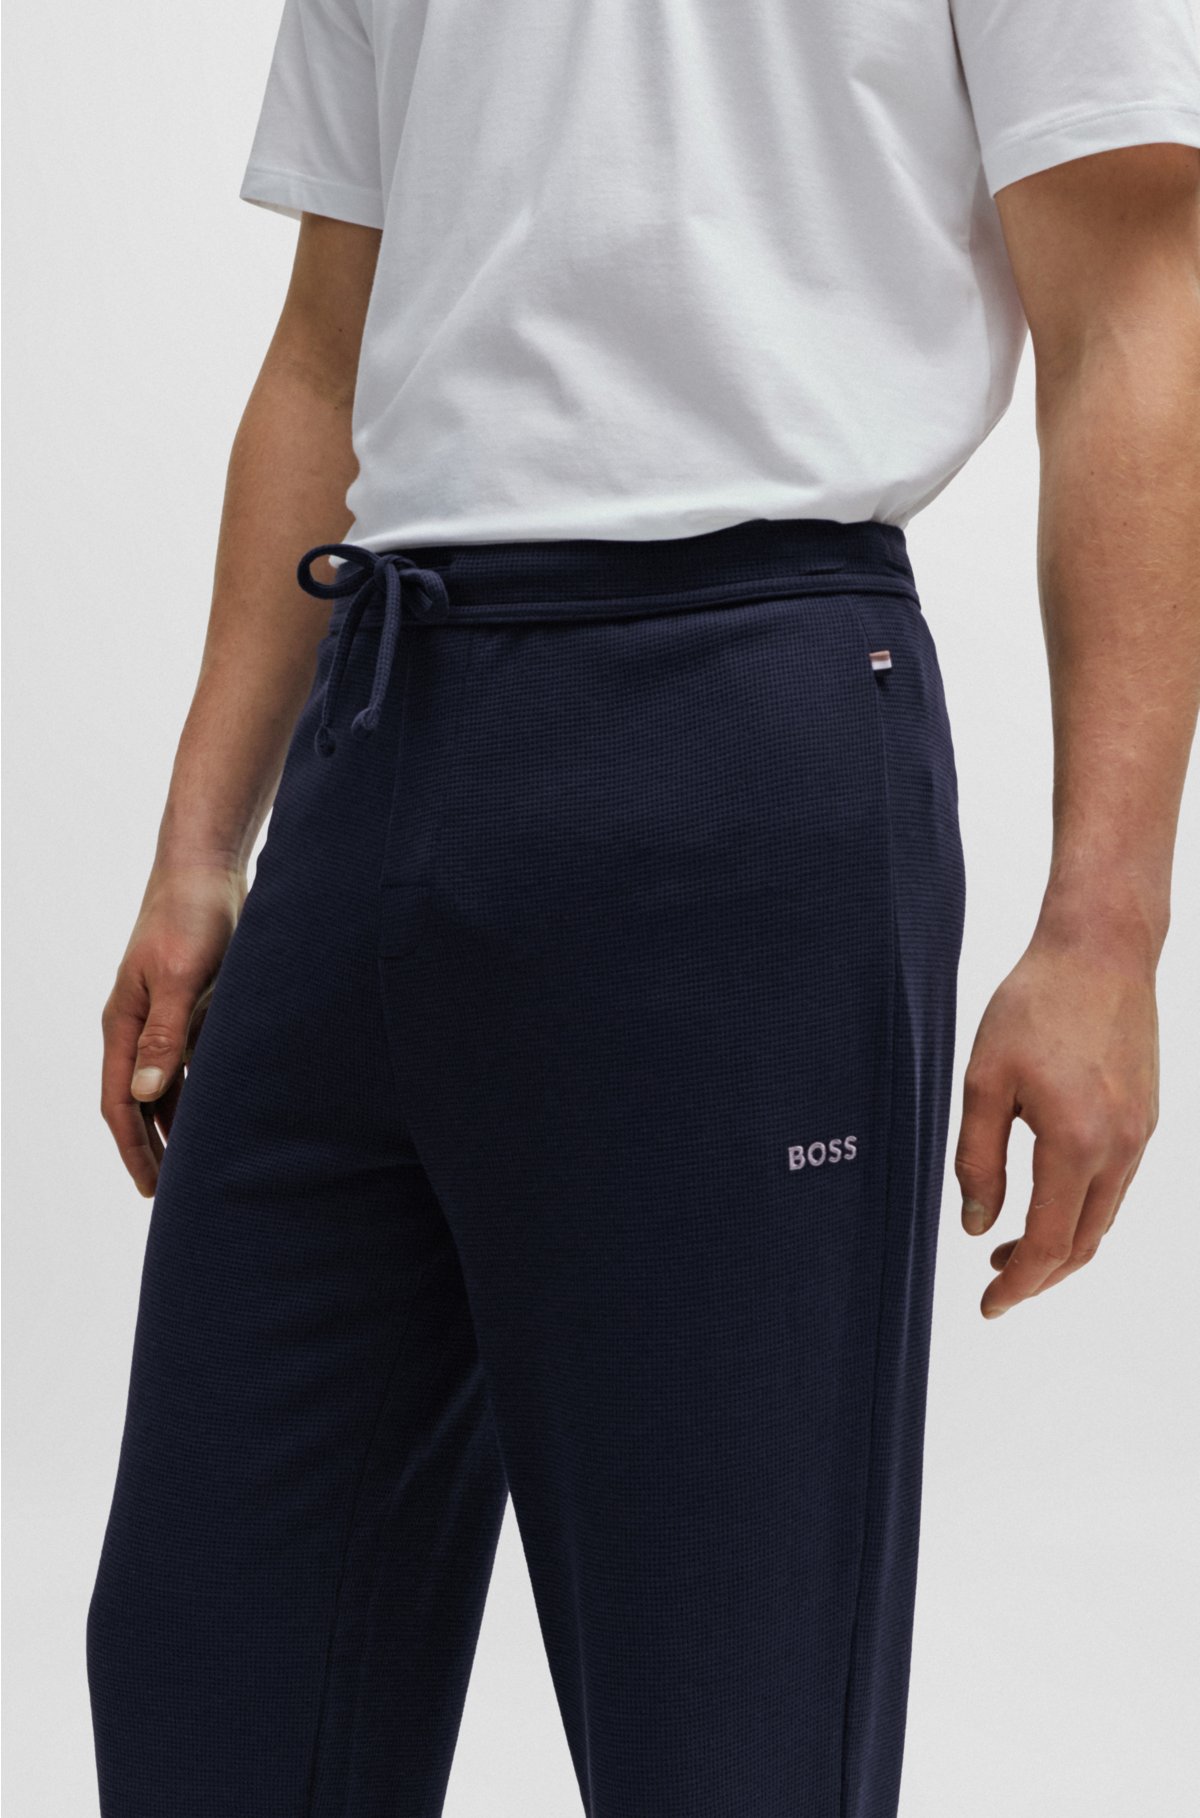 BOSS - Cotton-blend pyjama bottoms with logo embroidered